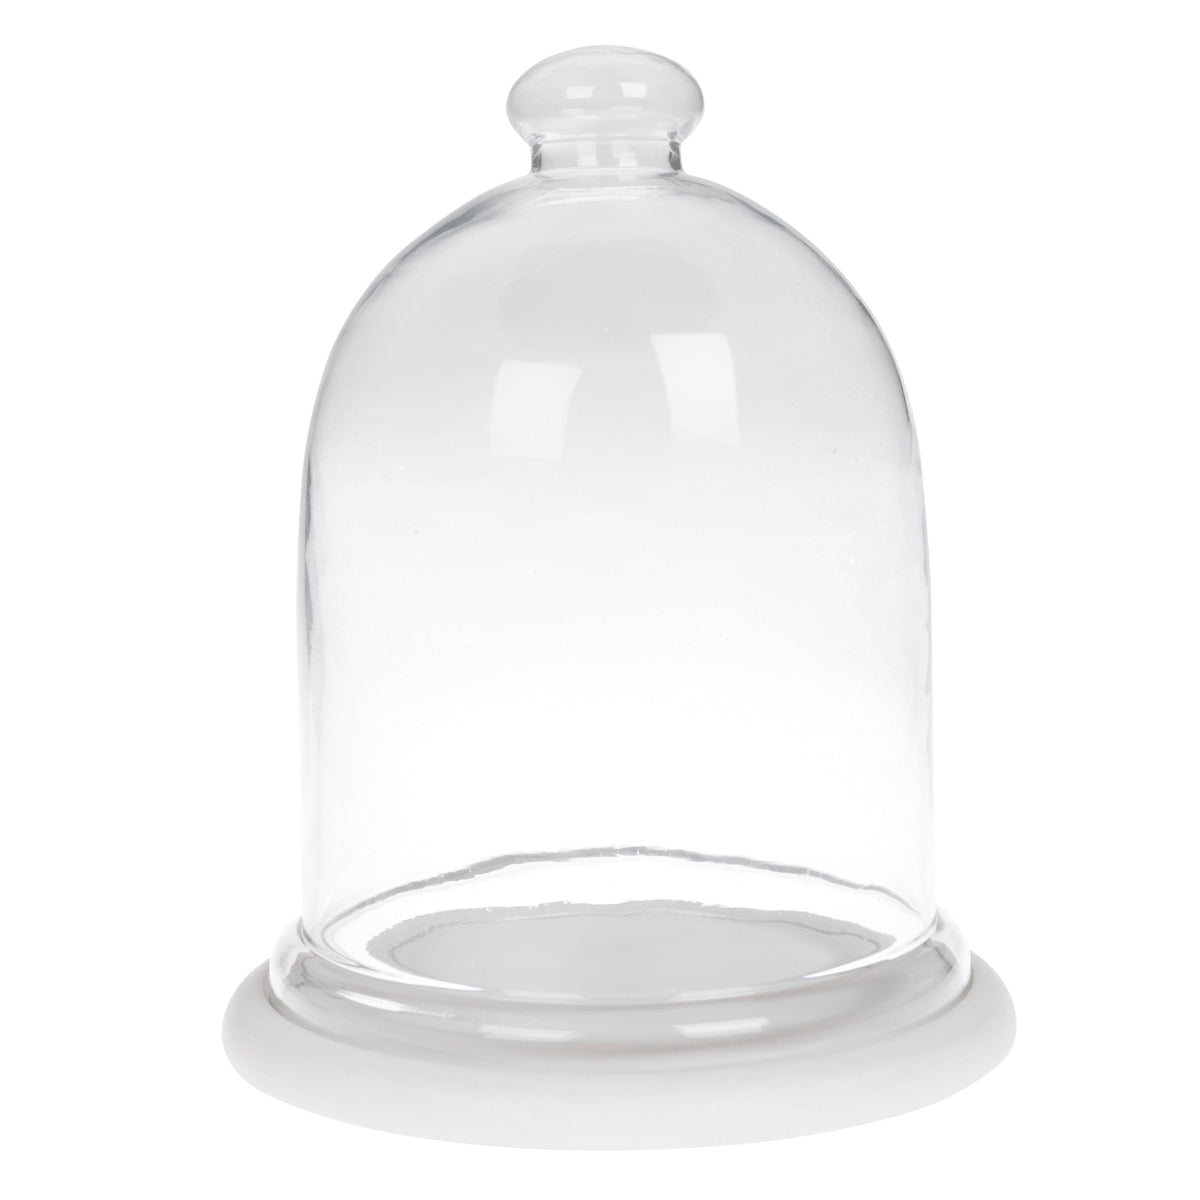 Large Glass Cloche by Sophie Allport